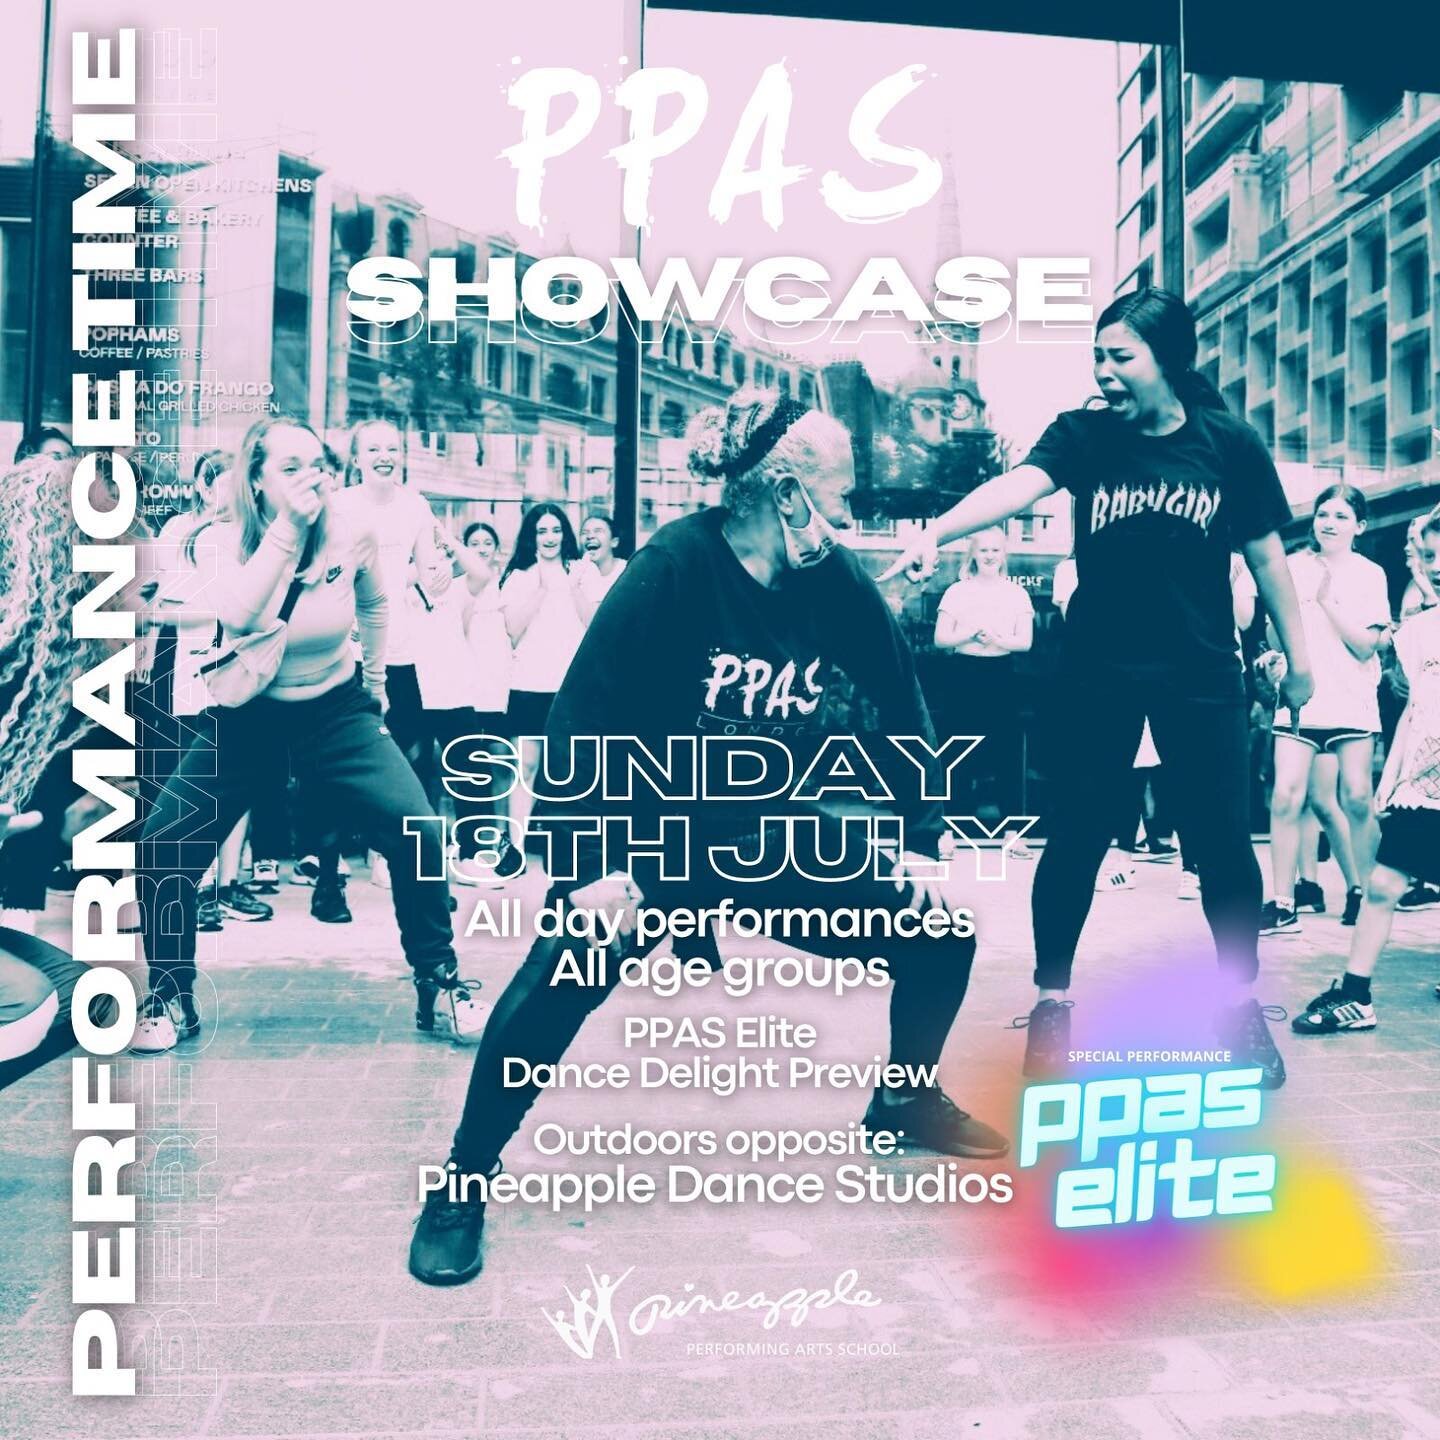 It&rsquo;s the end of term for PPAS this Sunday! We are looking forward to showcasing all our students from age 4 -16 throughout the day from 12 noon - 6pm outside @pineappledancestudios shop! 
Come and see the enthusiasm and talent of the children a